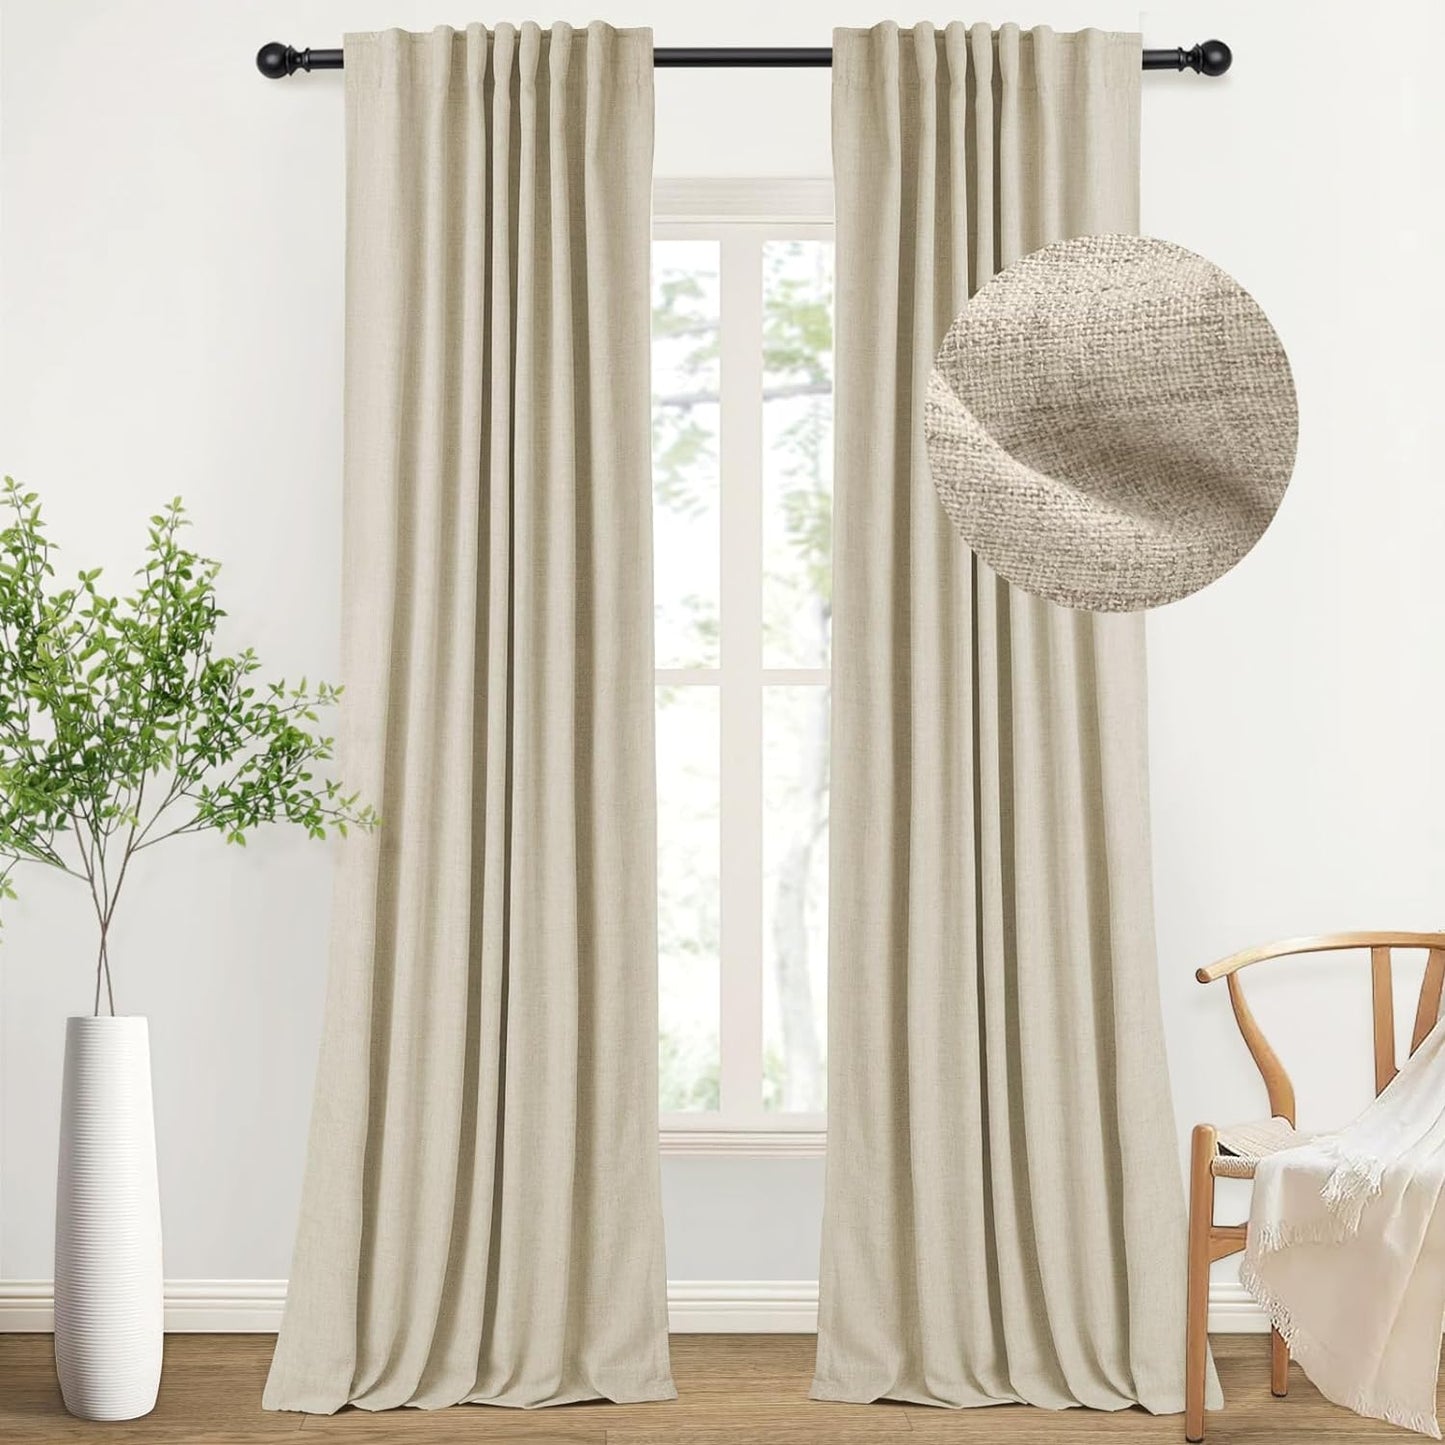 INOVADAY 100% Blackout Curtains 96 Inches Long 2 Panels Set, Thermal Insulated Linen Blackout Curtains for Bedroom, Back Tab/Rod Pocket Curtains & Drapes for Living Room - Beige, W50 X L96  INOVADAY 08 Natural 50''W X 90''L 